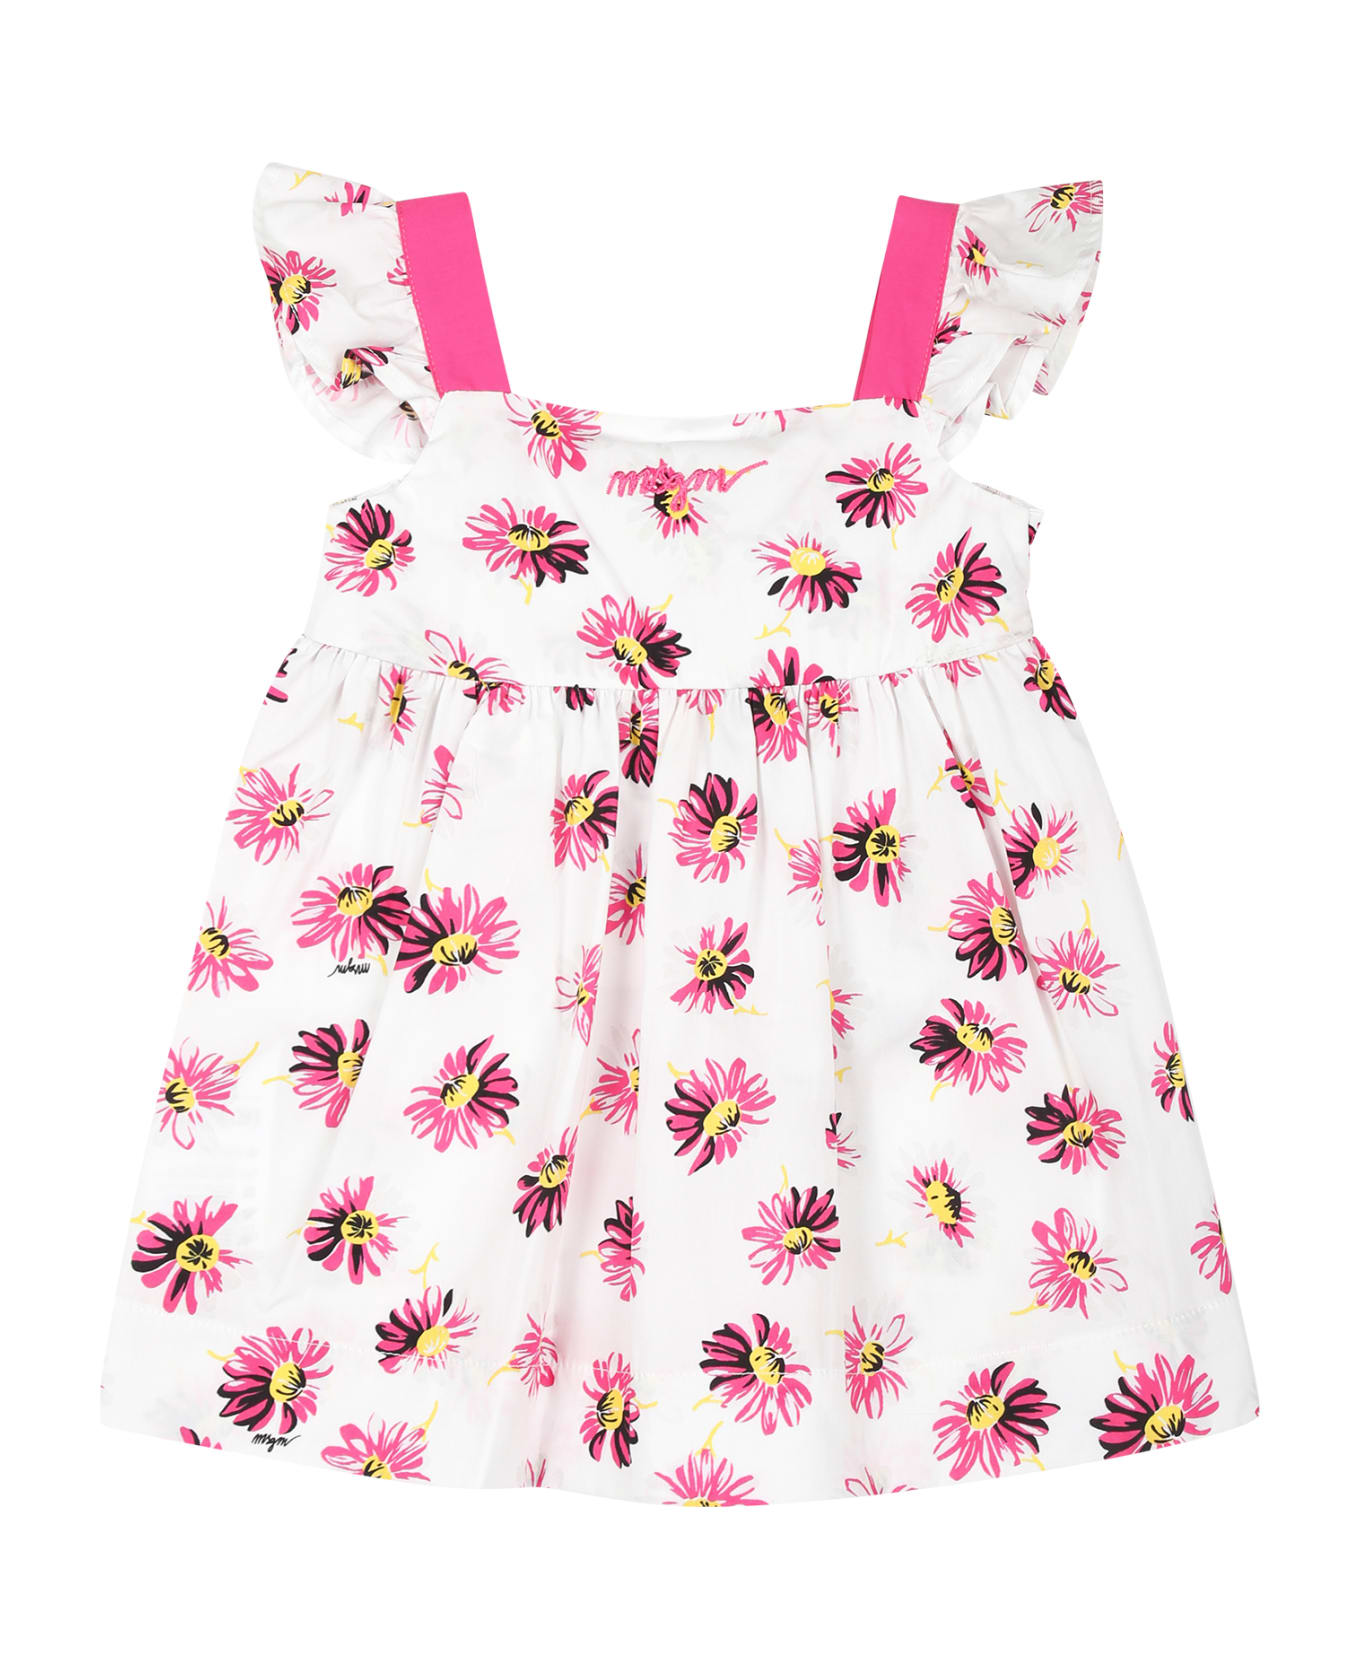 MSGM White Dress For Baby Girl With Flowers Print - White ウェア